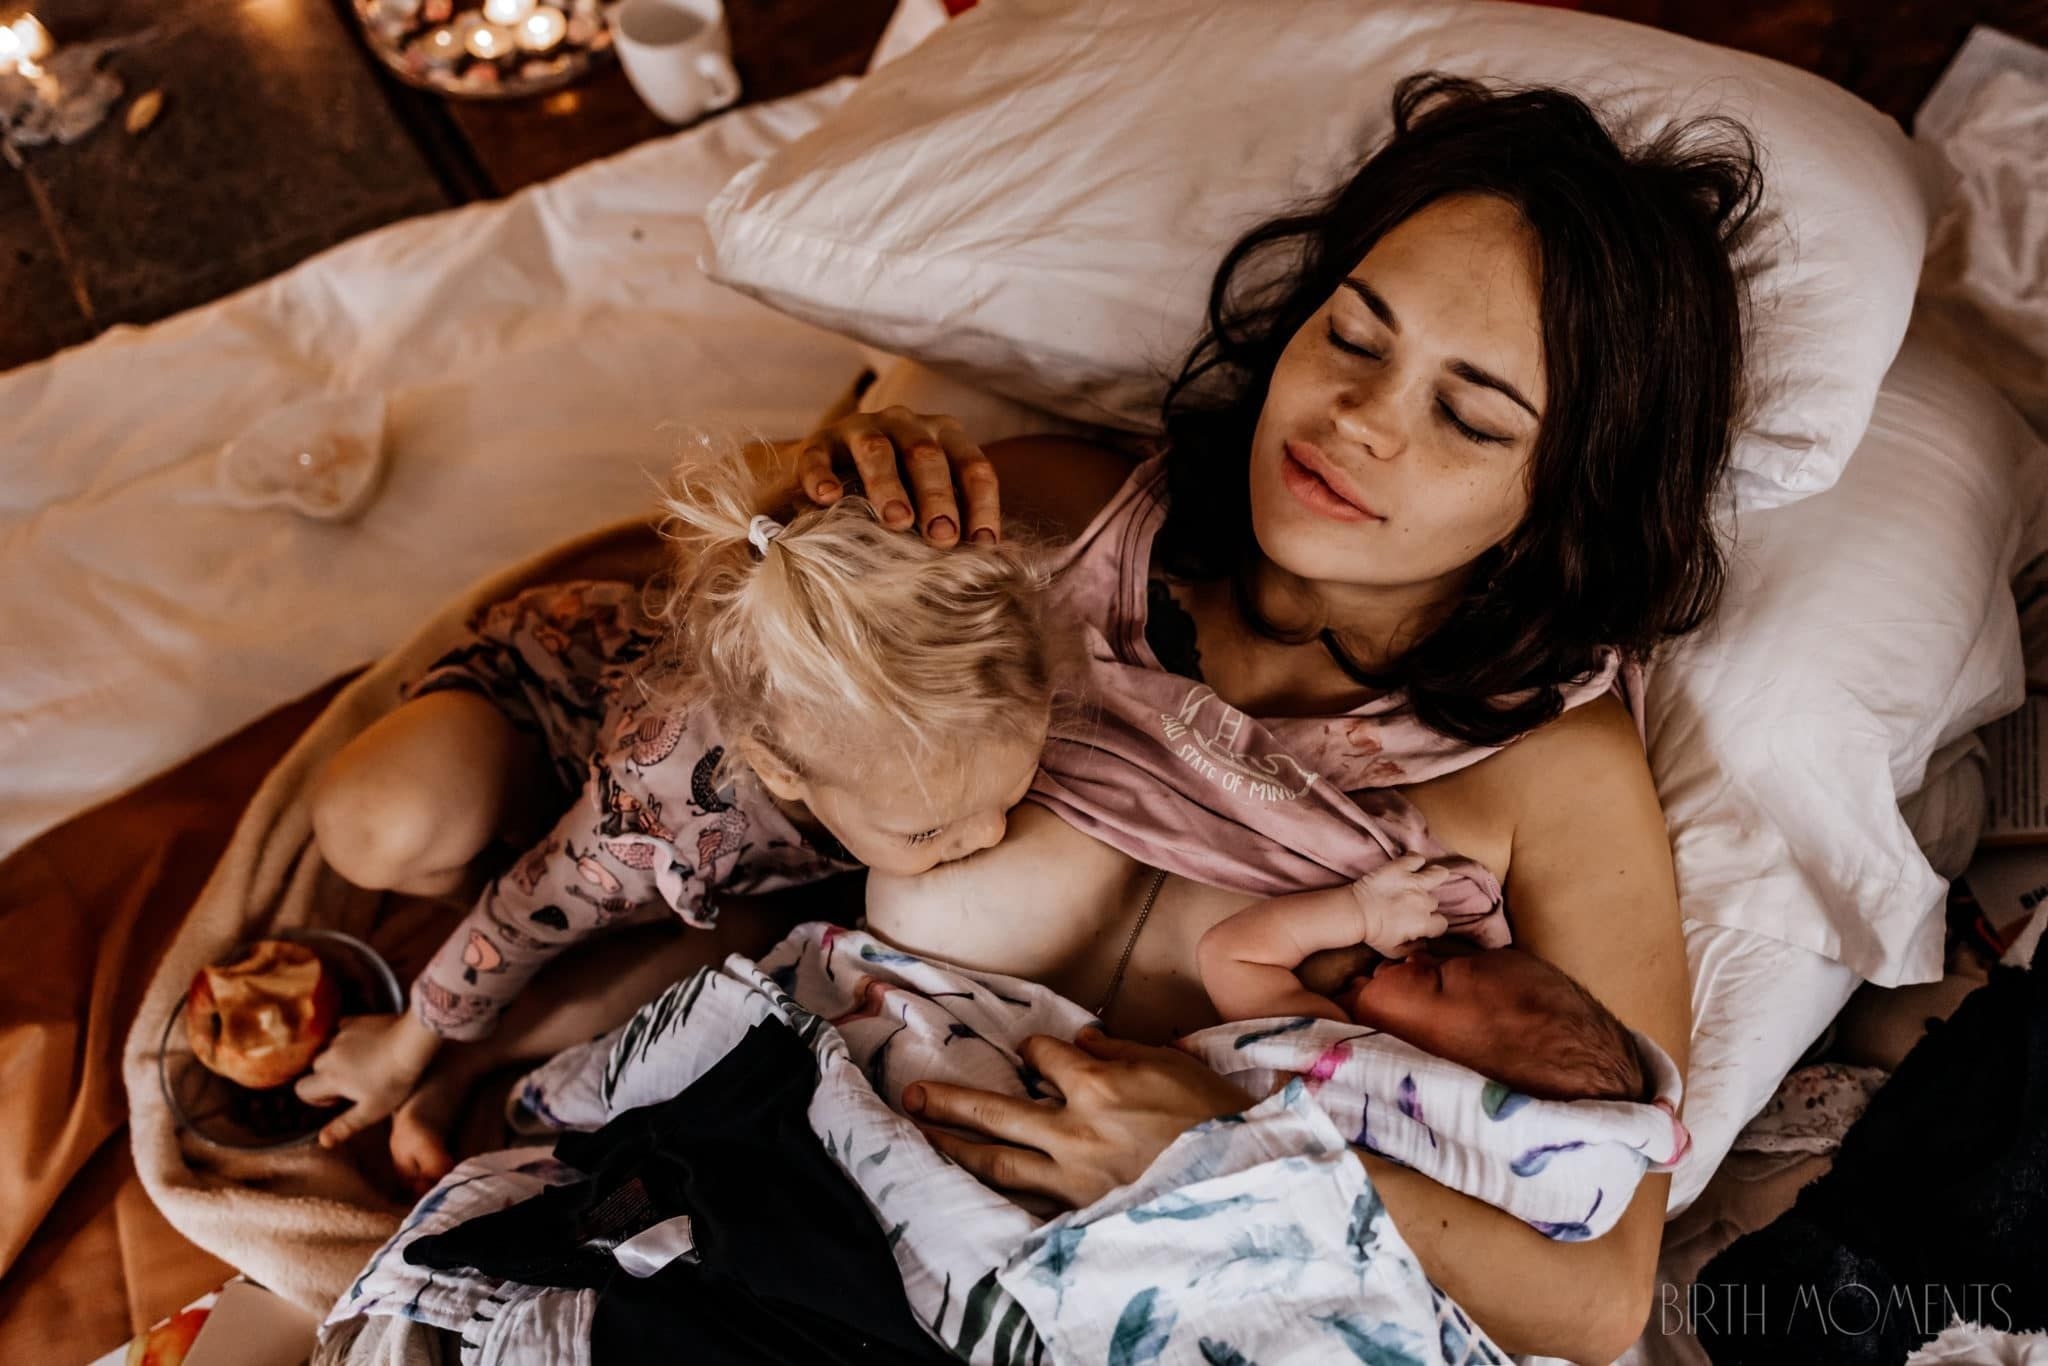 A woman breastfeeds her toddler and new baby